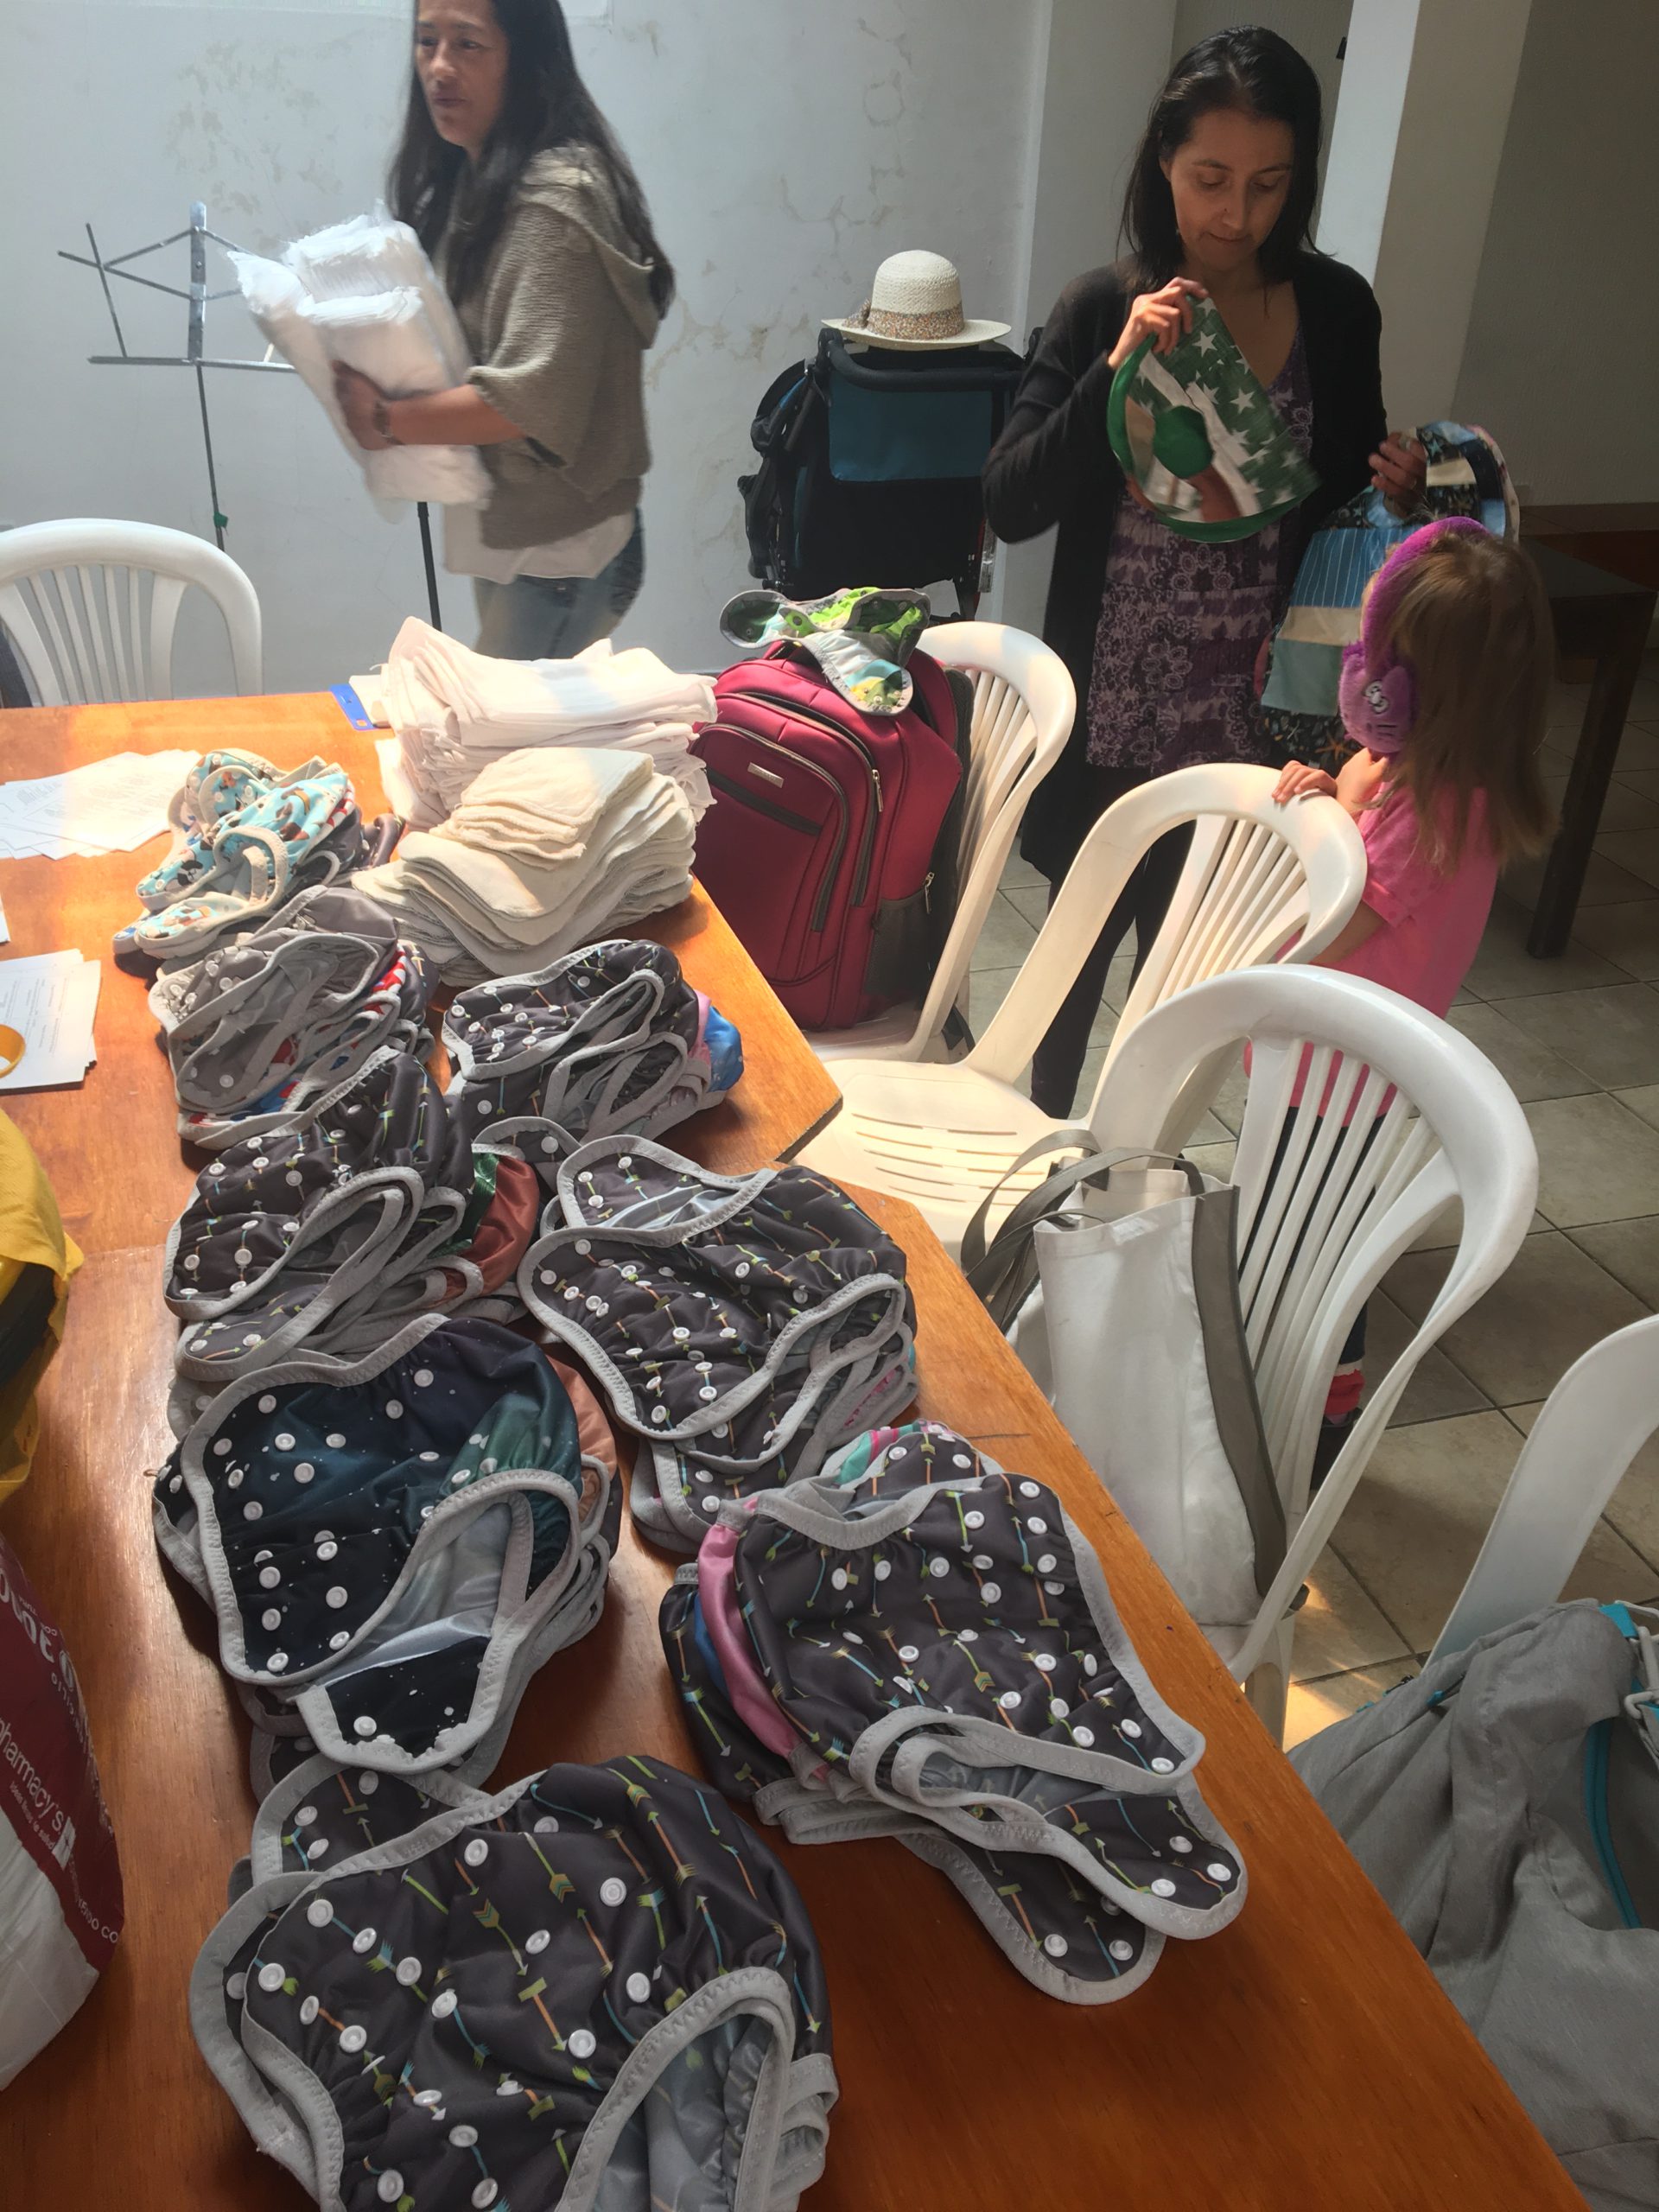 Delicia Brava, with her daughter on the right, sews reusable cloth diapers for refugee mothers. Alba Silva, left, helps distribute the diapers through the Refugee Project at Quito Mennonite Church. Photo provided by Peter Wigginton.